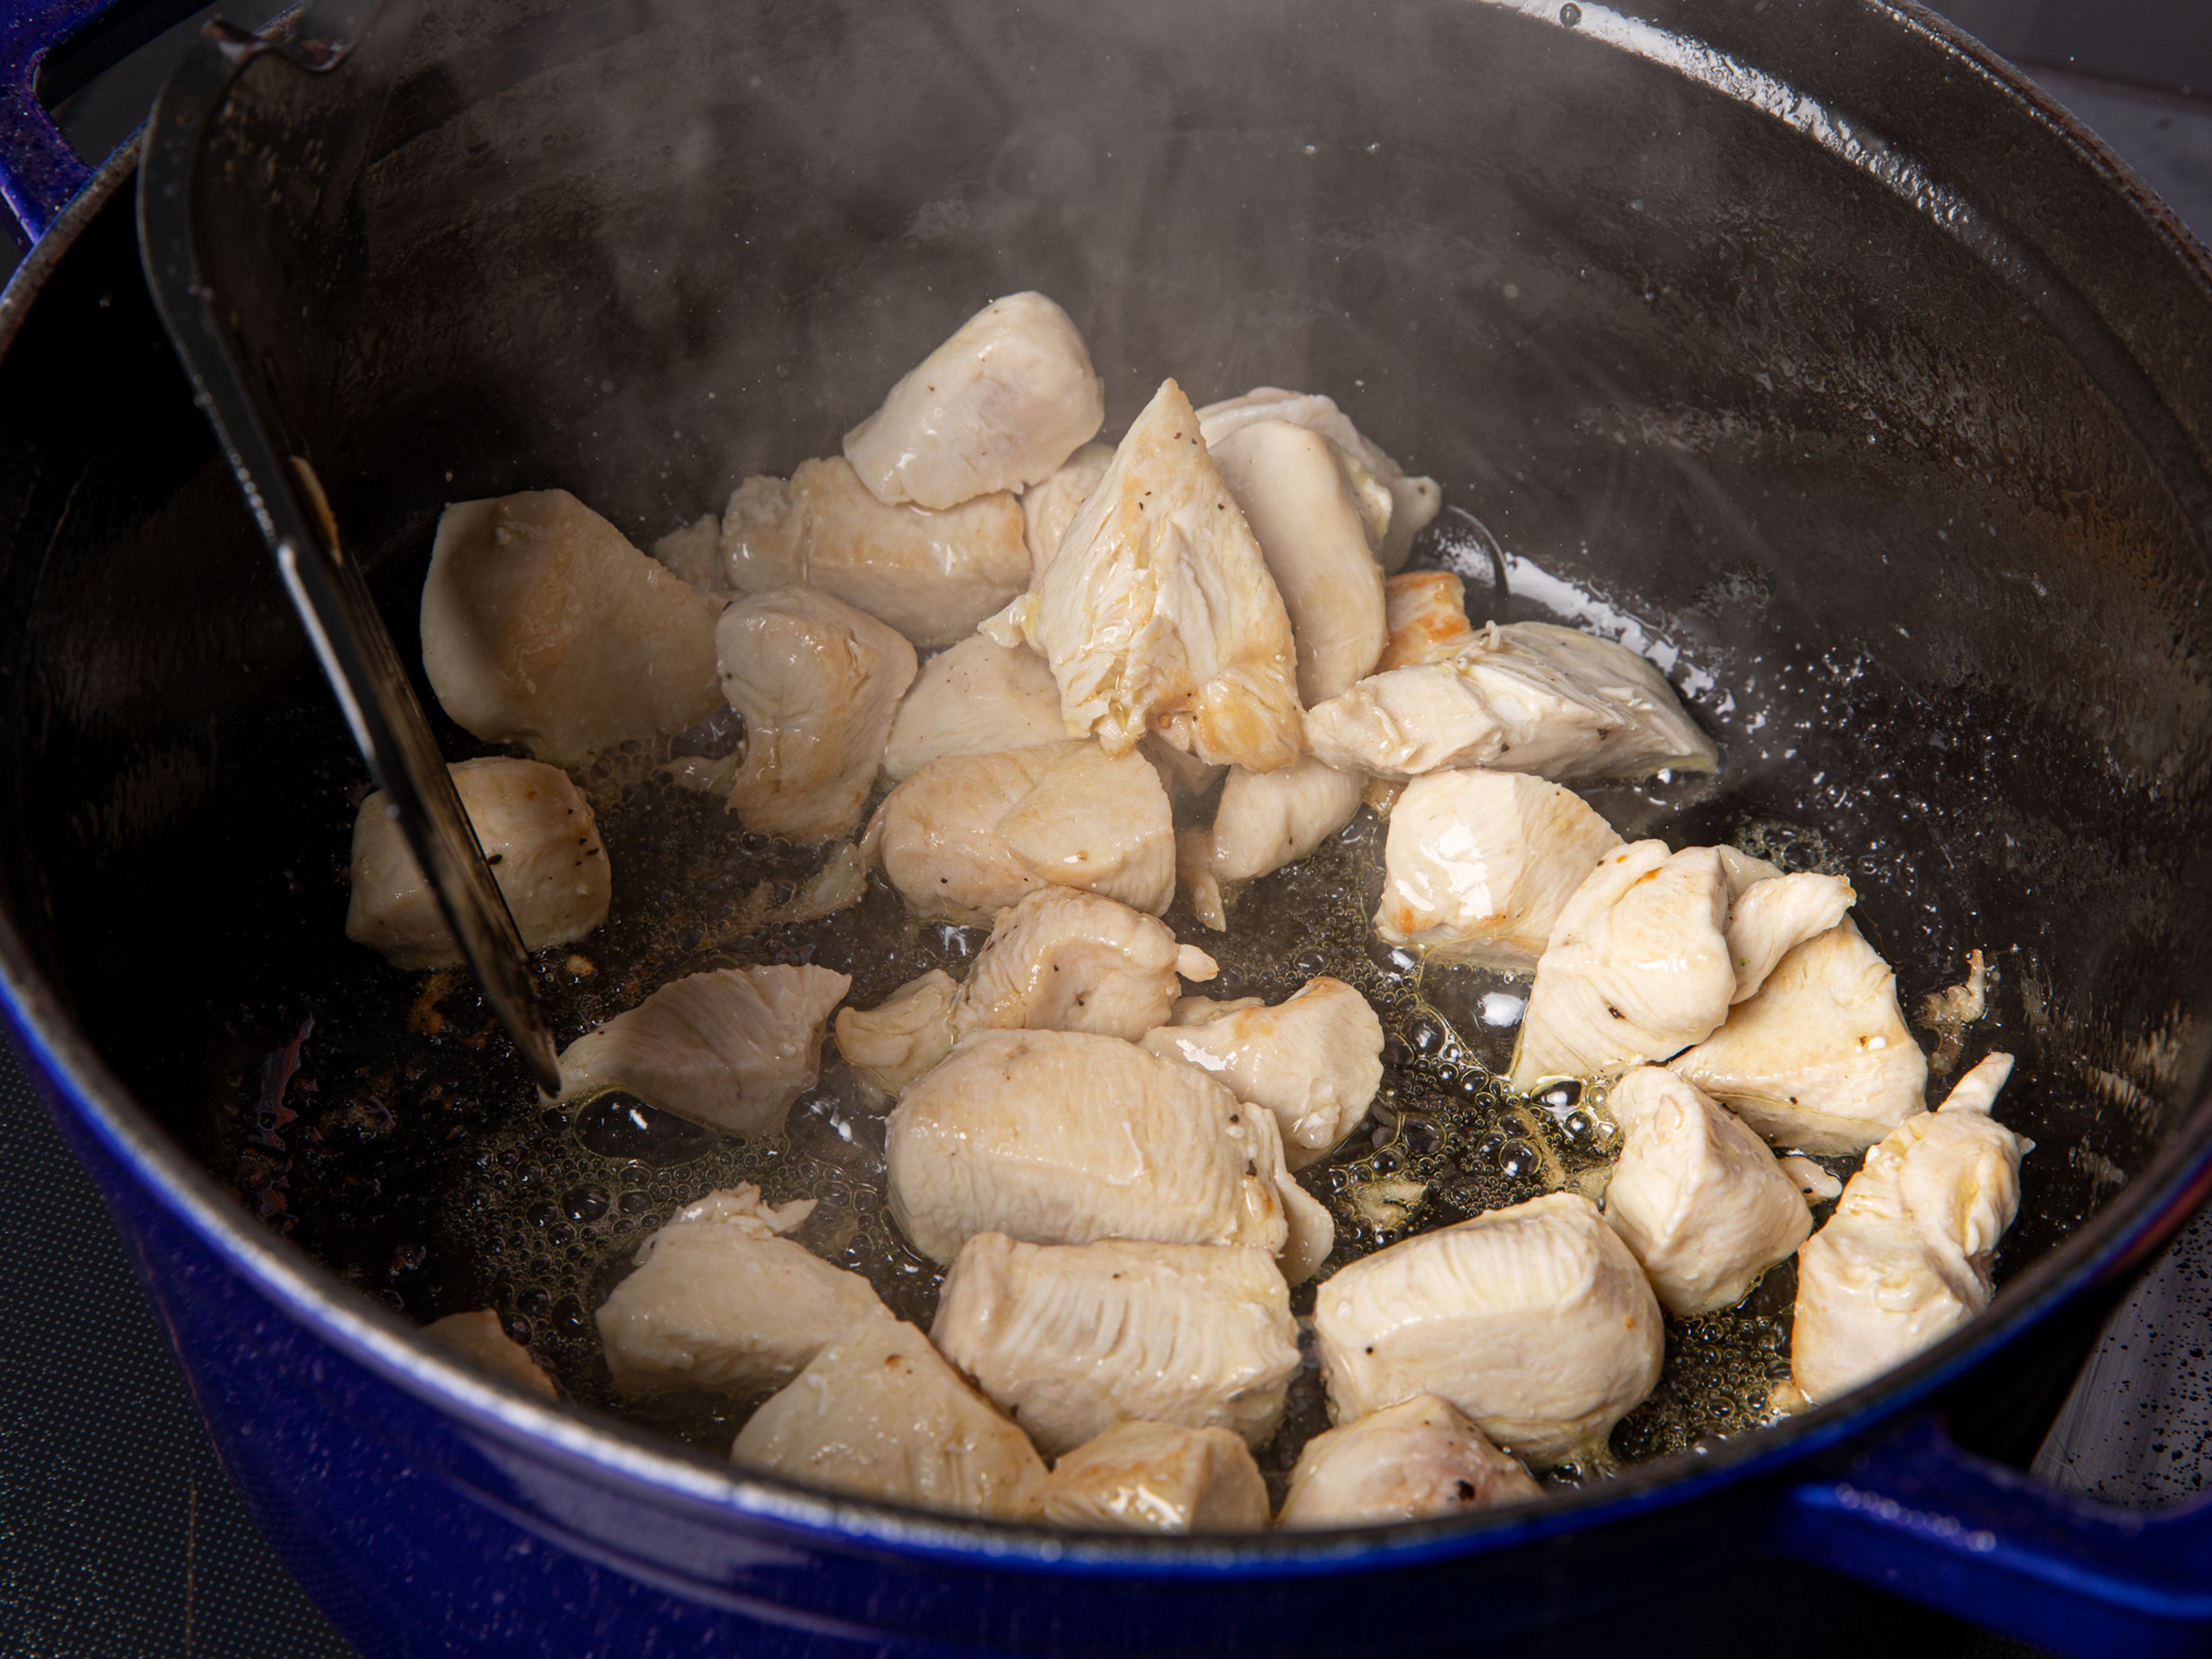 Toss the diced chicken with the Cajun seasoning and season with salt. Heat the oil and butter in a large pot. Add the chicken and sear for approx. 4—5 min, tossing regularly. The chicken does not need to be cooked through, as it will continue cooking later on. Remove the chicken from the pan and transfer to a bowl.